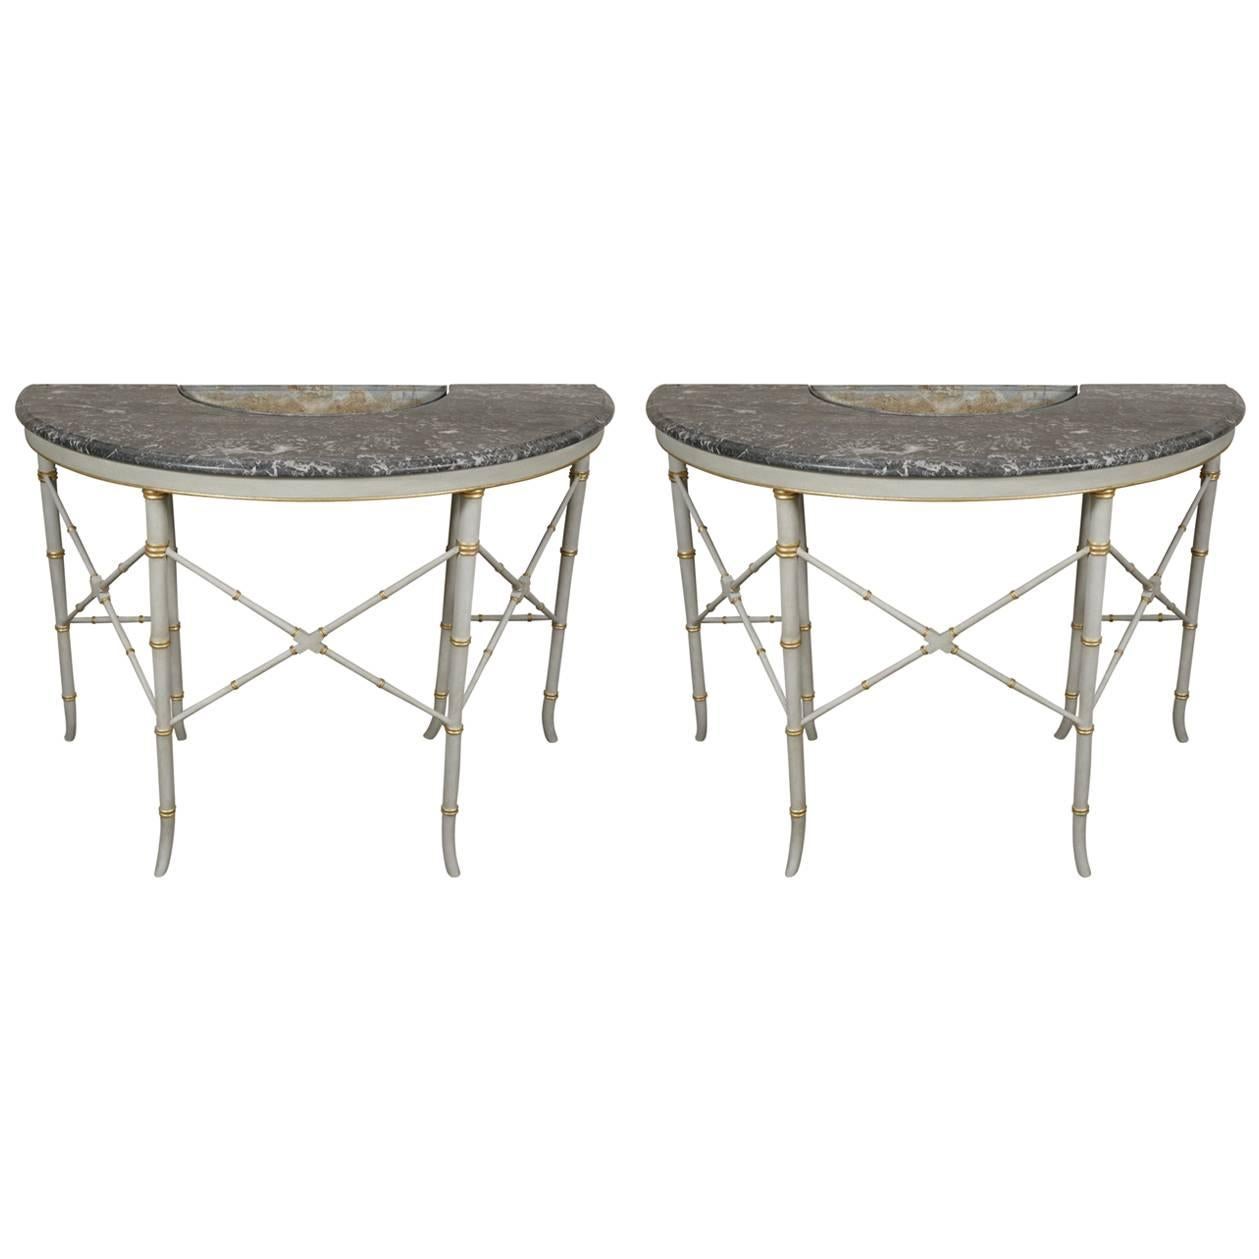 Pair of French Faux Bamboo Marble Topped Demi-Lune Console Planter Tables